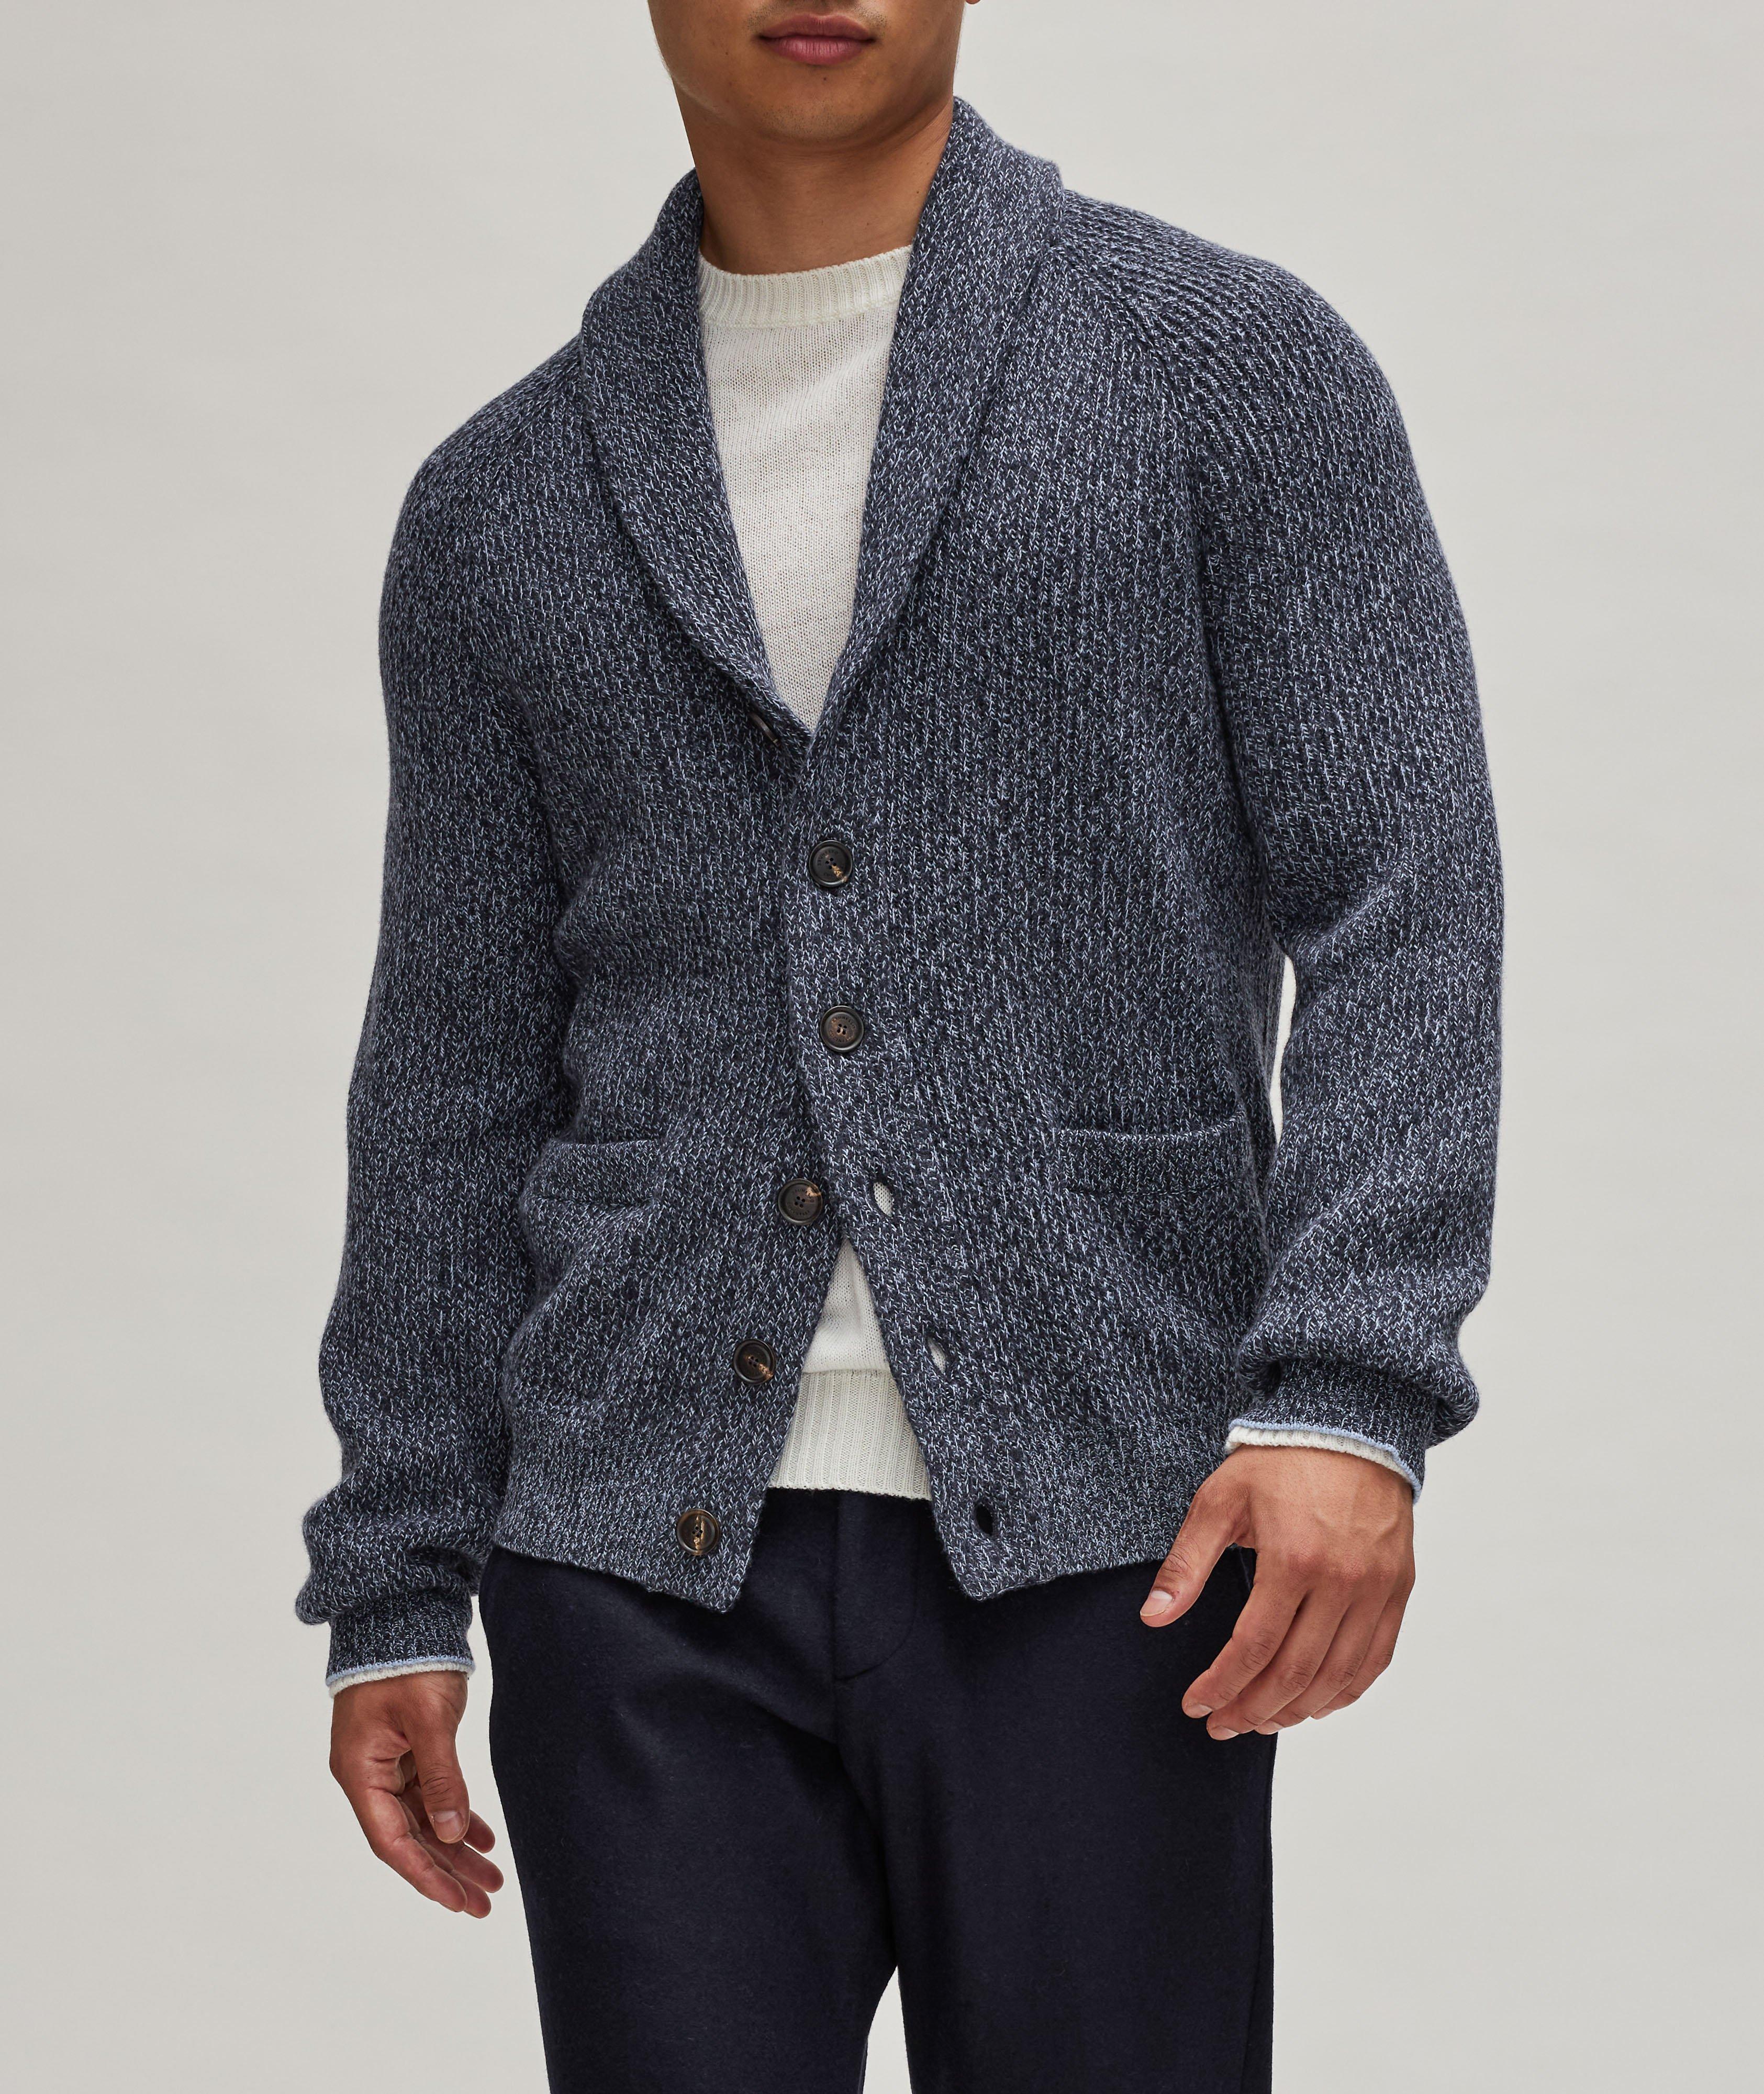 Luxury Collection “Pearl Stitch” Quarter-zip Sweater